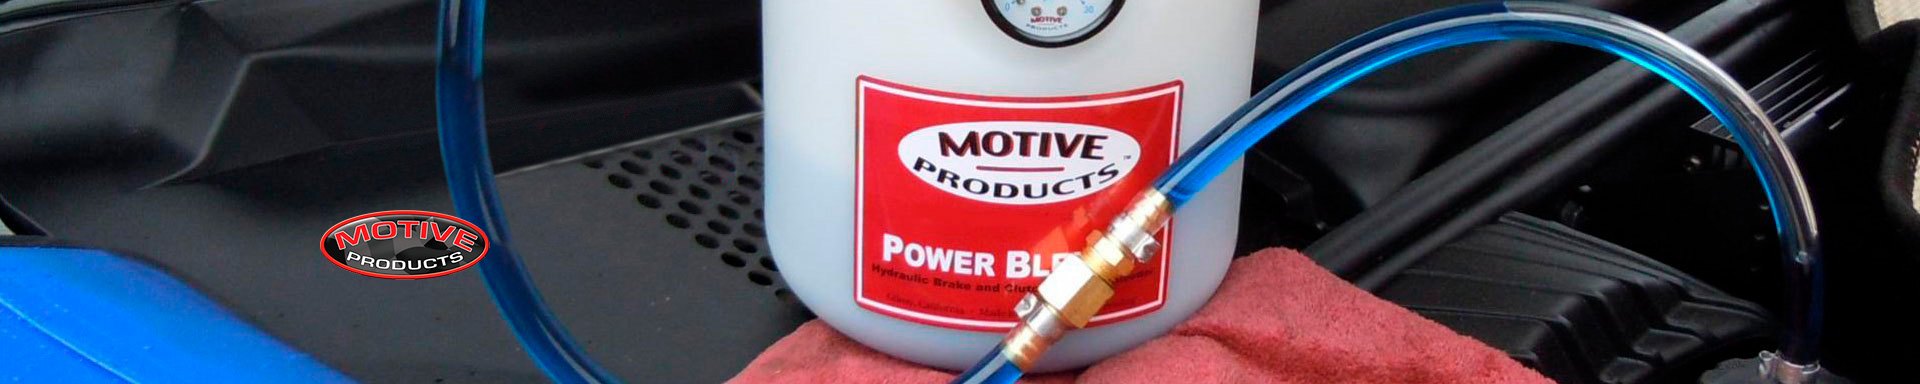 Motive Products Oil Change Tools